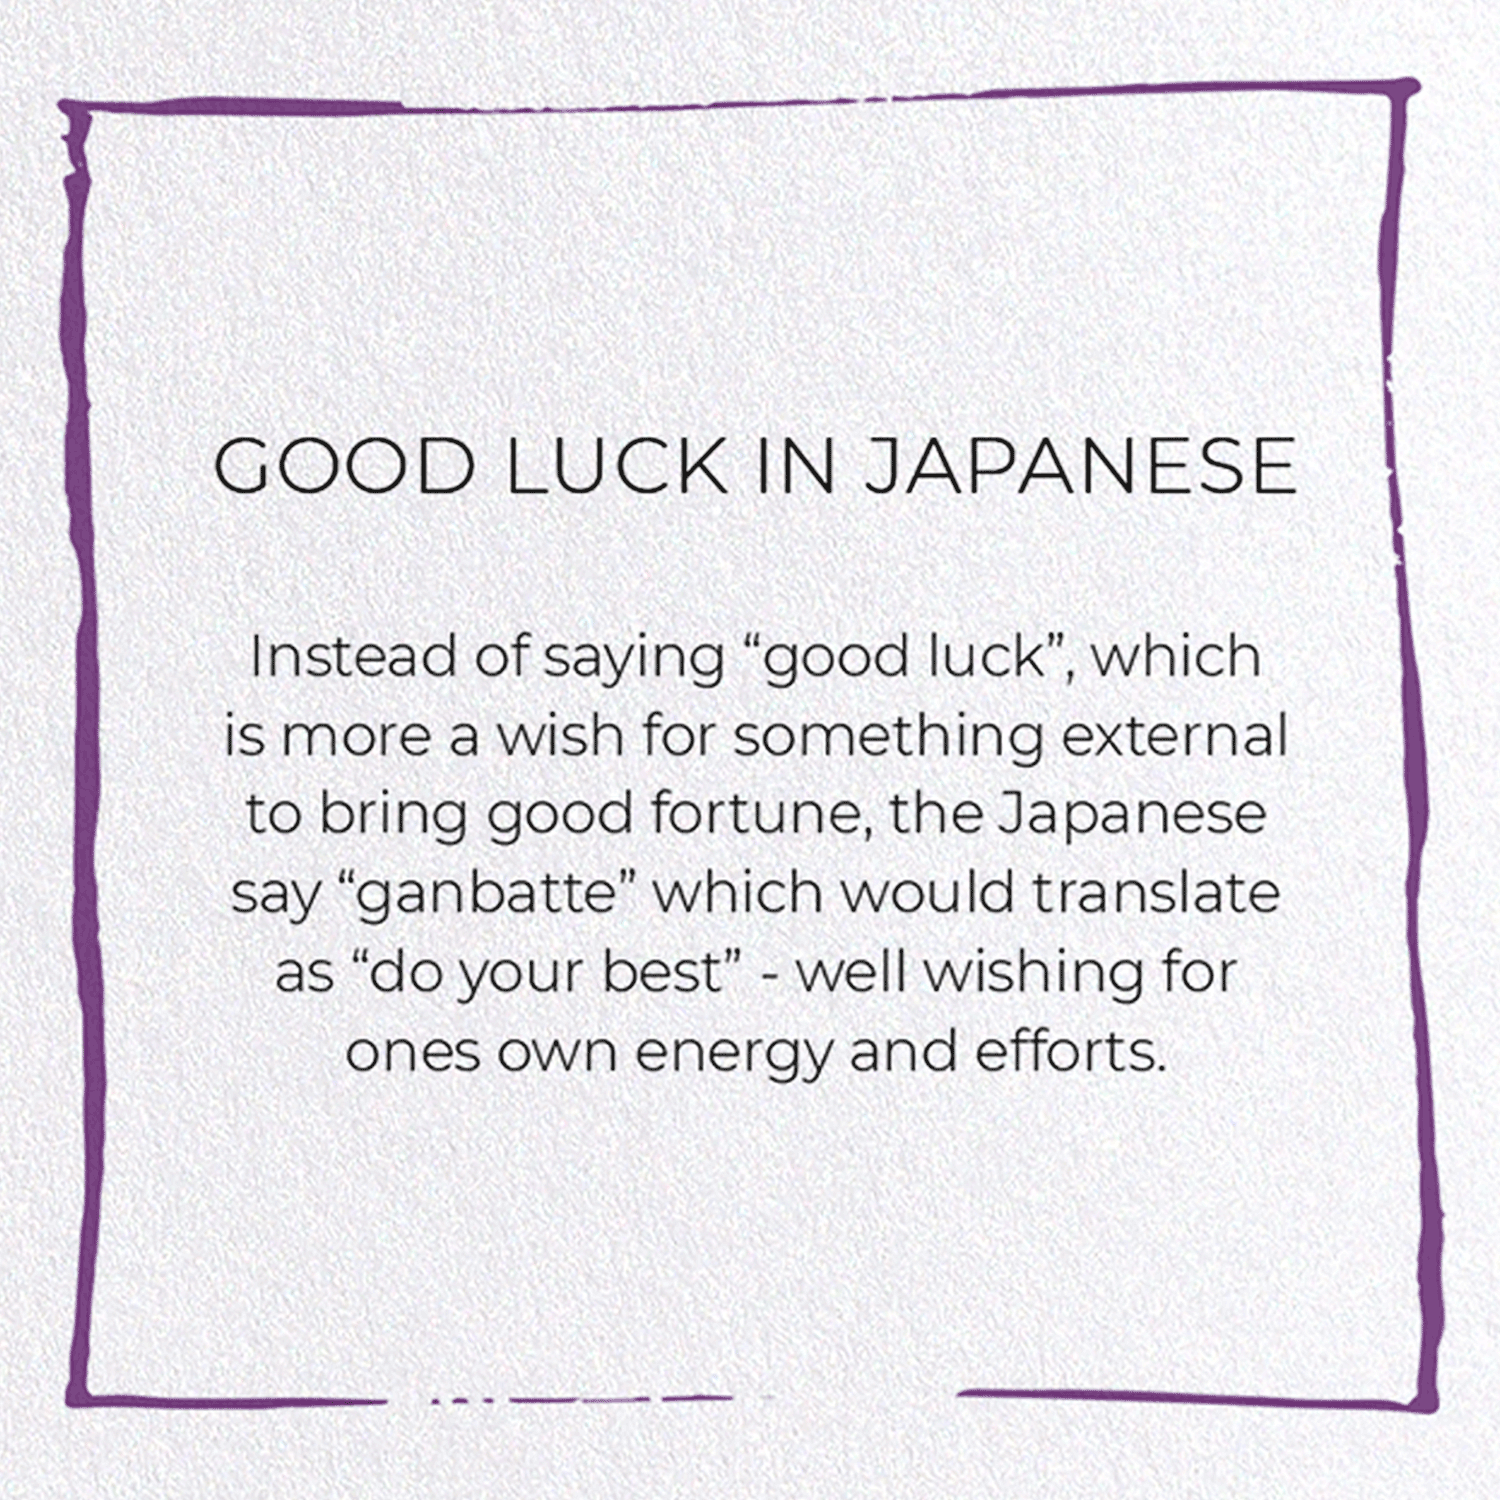 GOOD LUCK IN JAPANESE